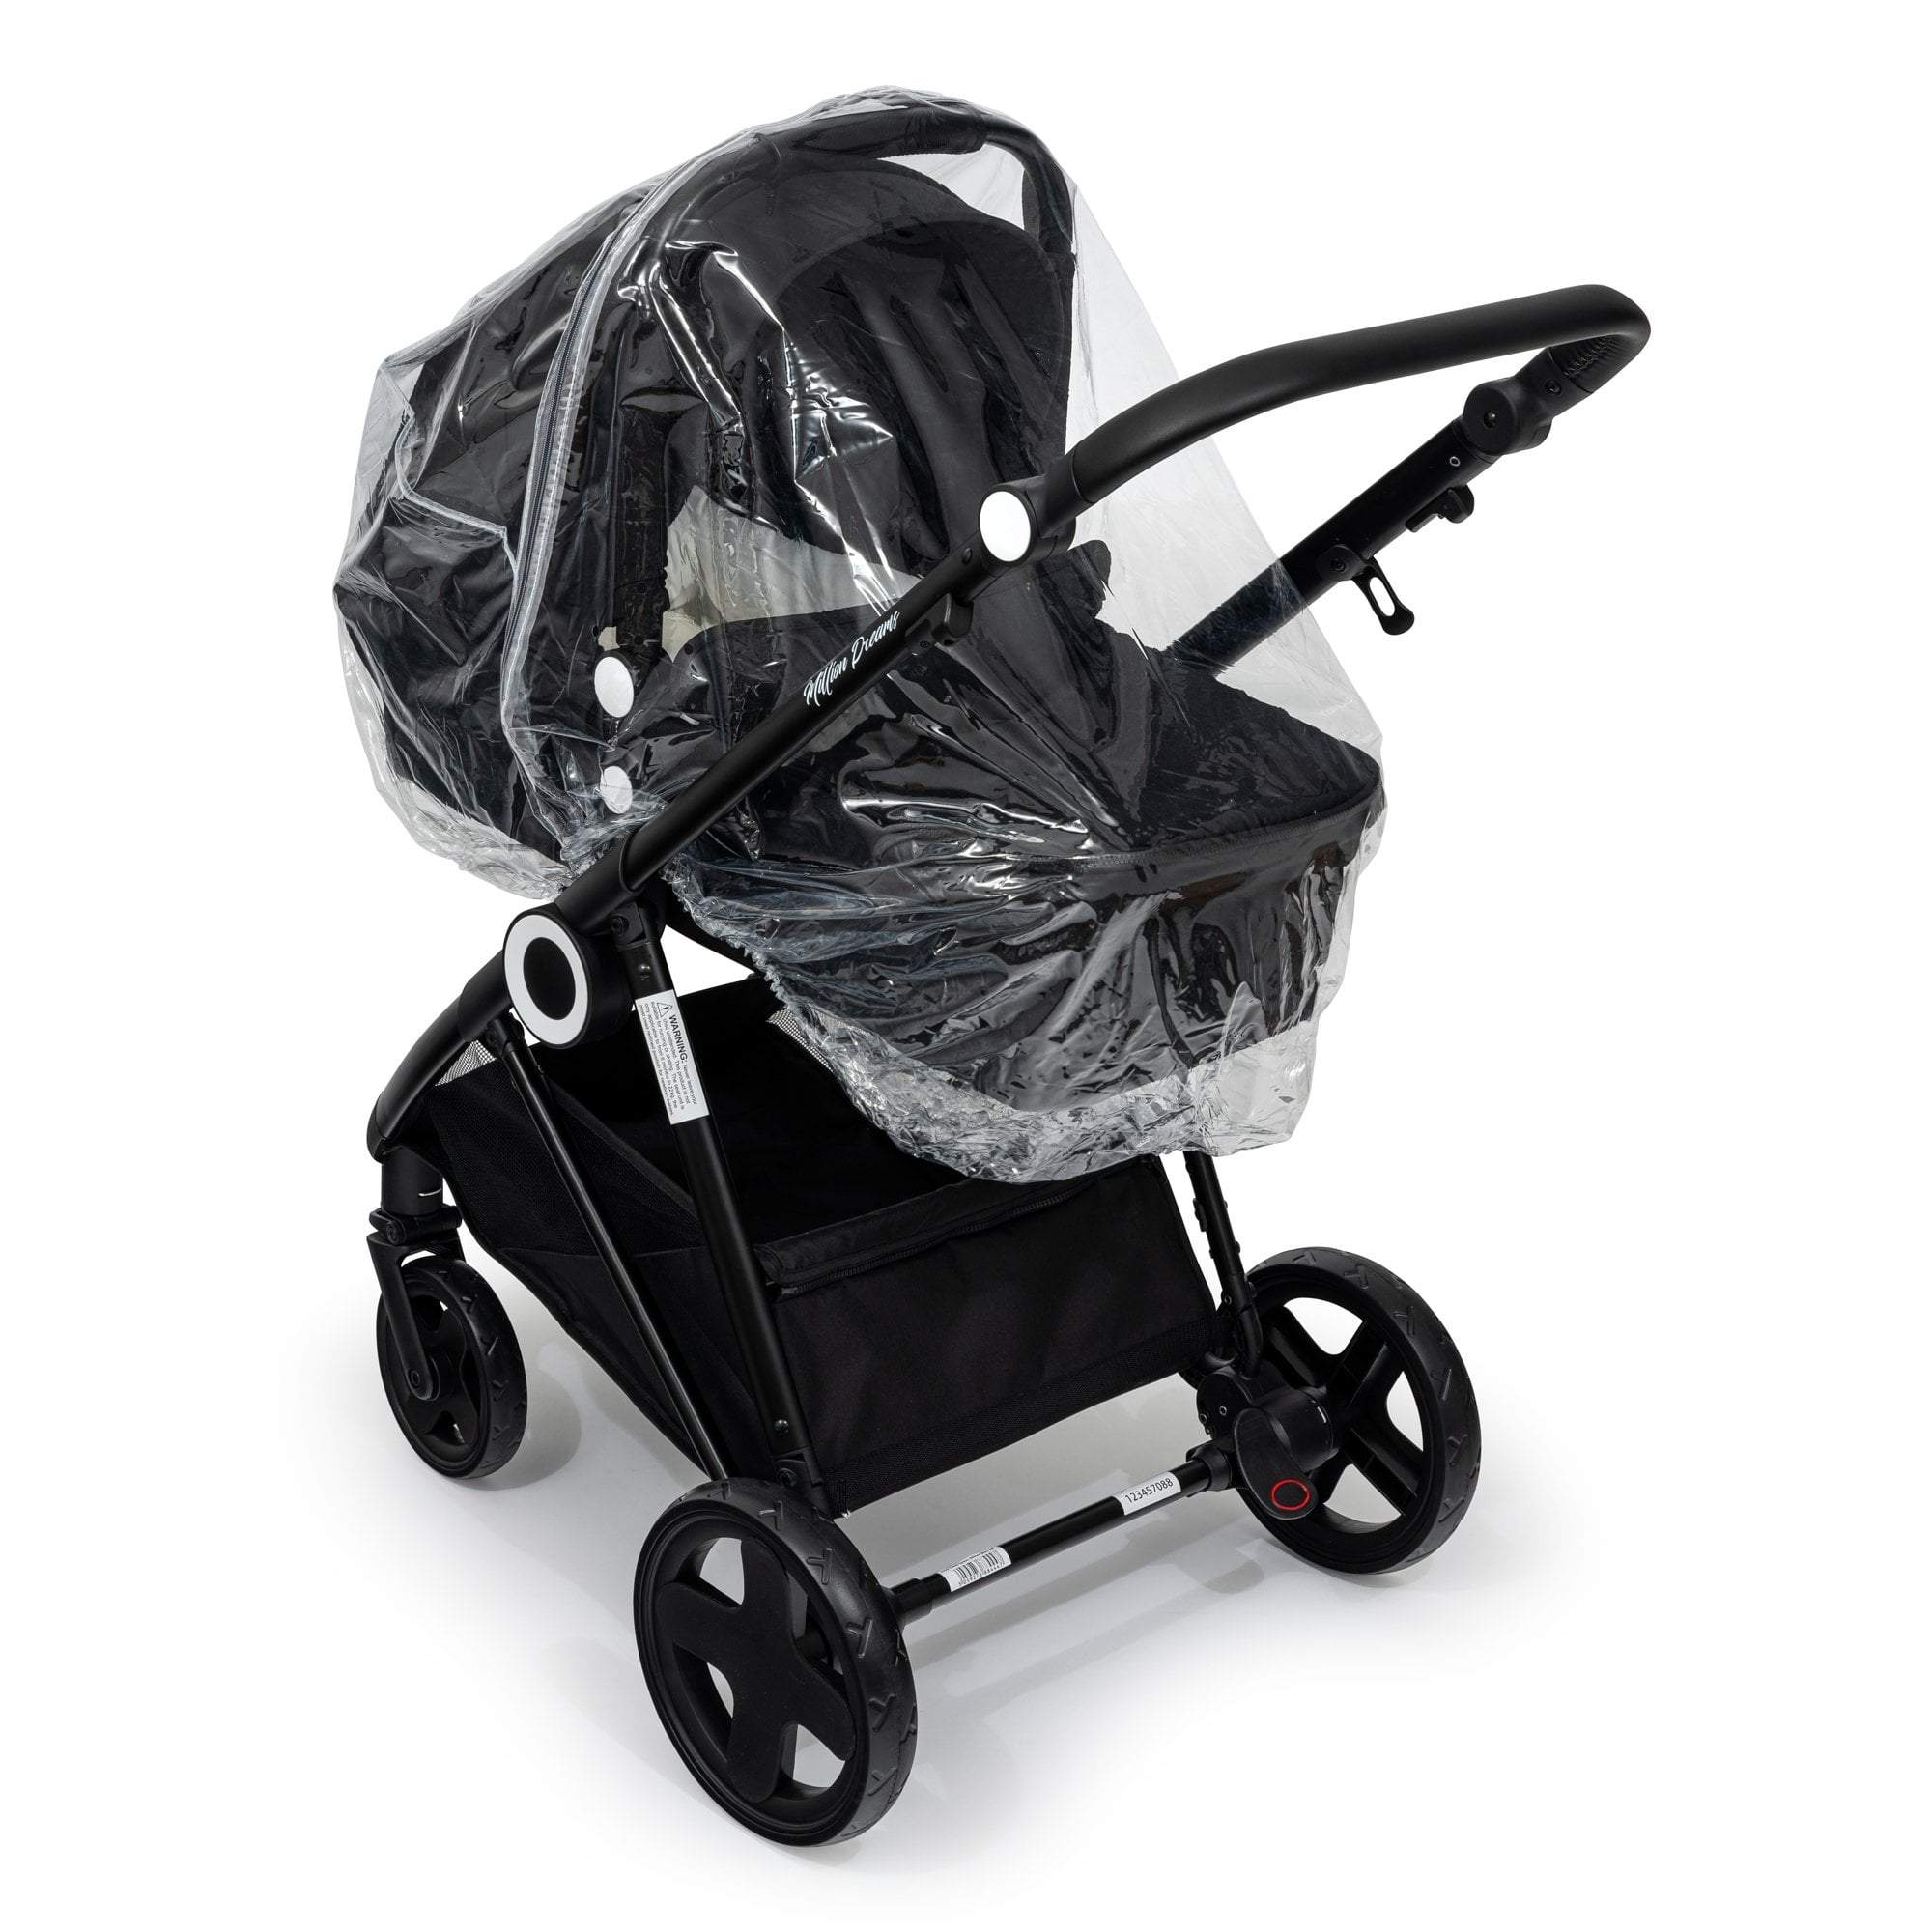 Carrycot Raincover Compatible With Mothercare - Fits All Models - For Your Little One